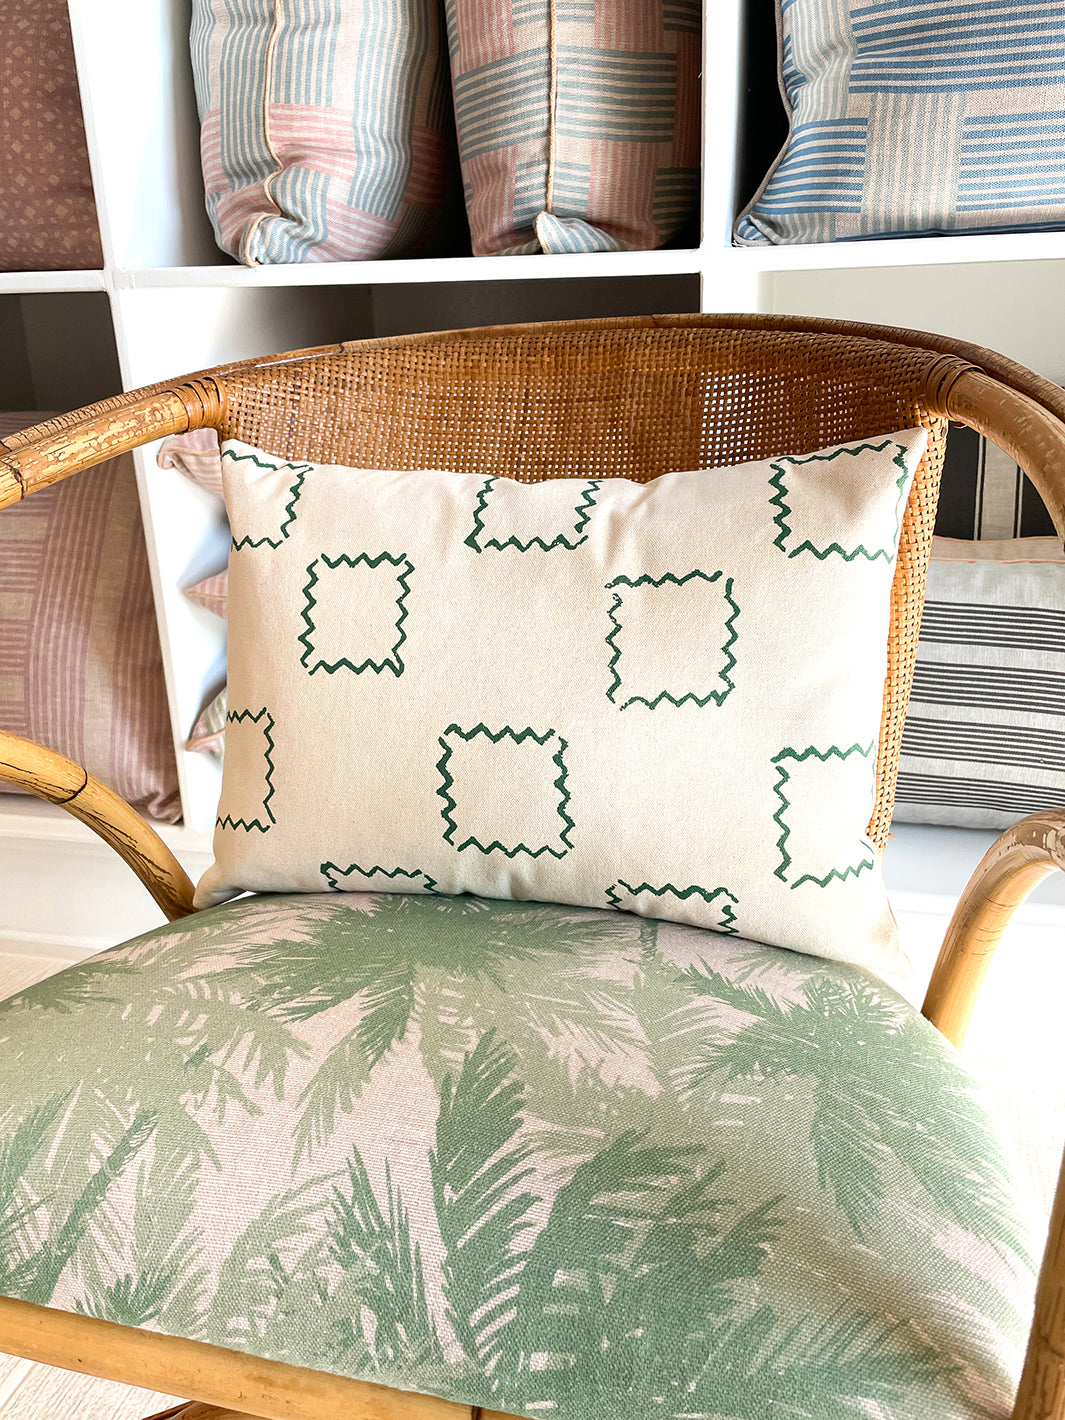 'Zag Squares' Lumbar Throw Pillow by Nathan Turner - Green on Raw Canvas